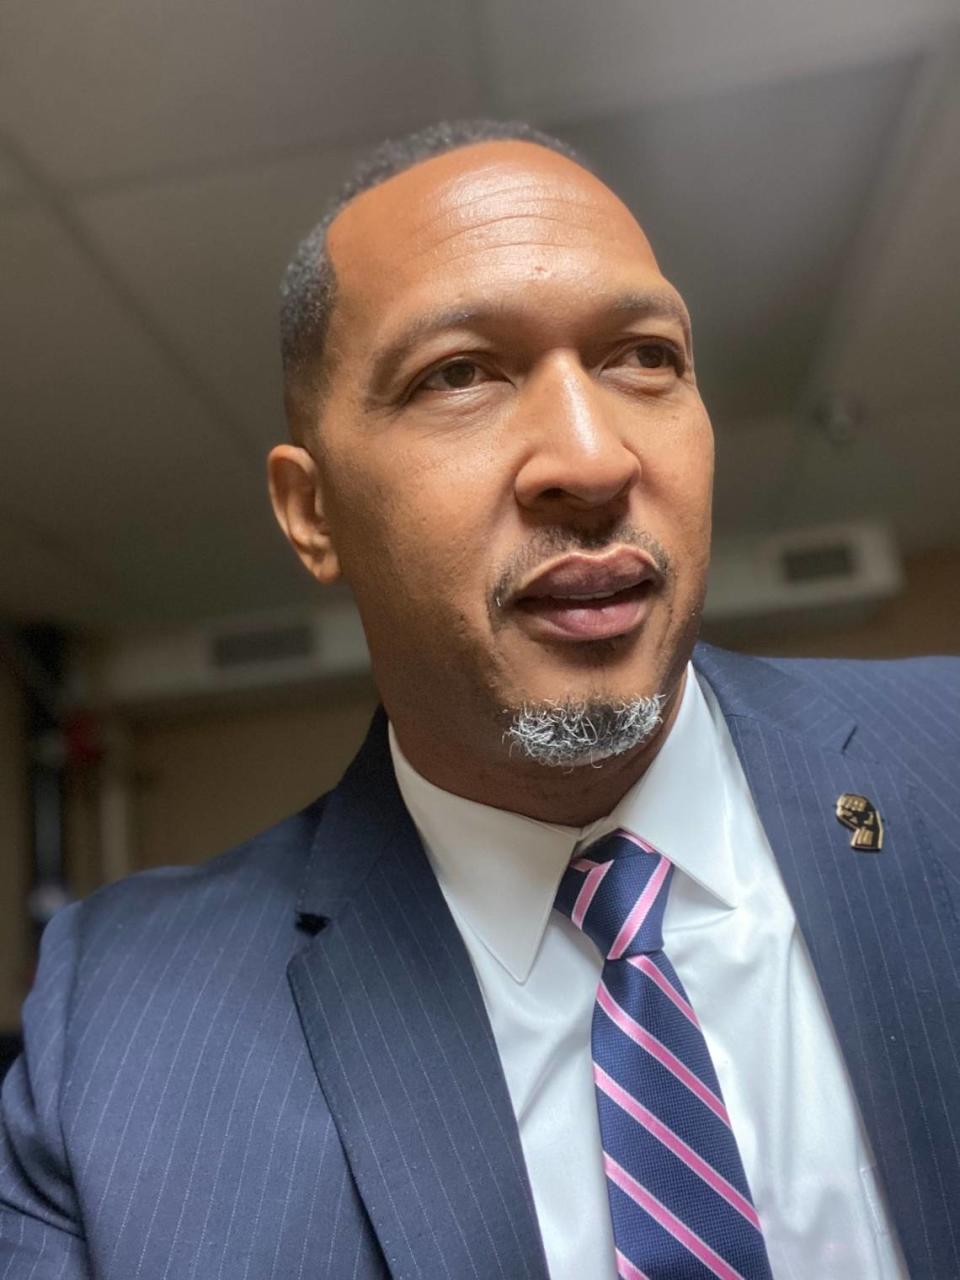 Willis Howard, a Democratic campaign consultant and former North Miami Beach administrator, is running for elections supervisor of Miami-Dade County in 2024.